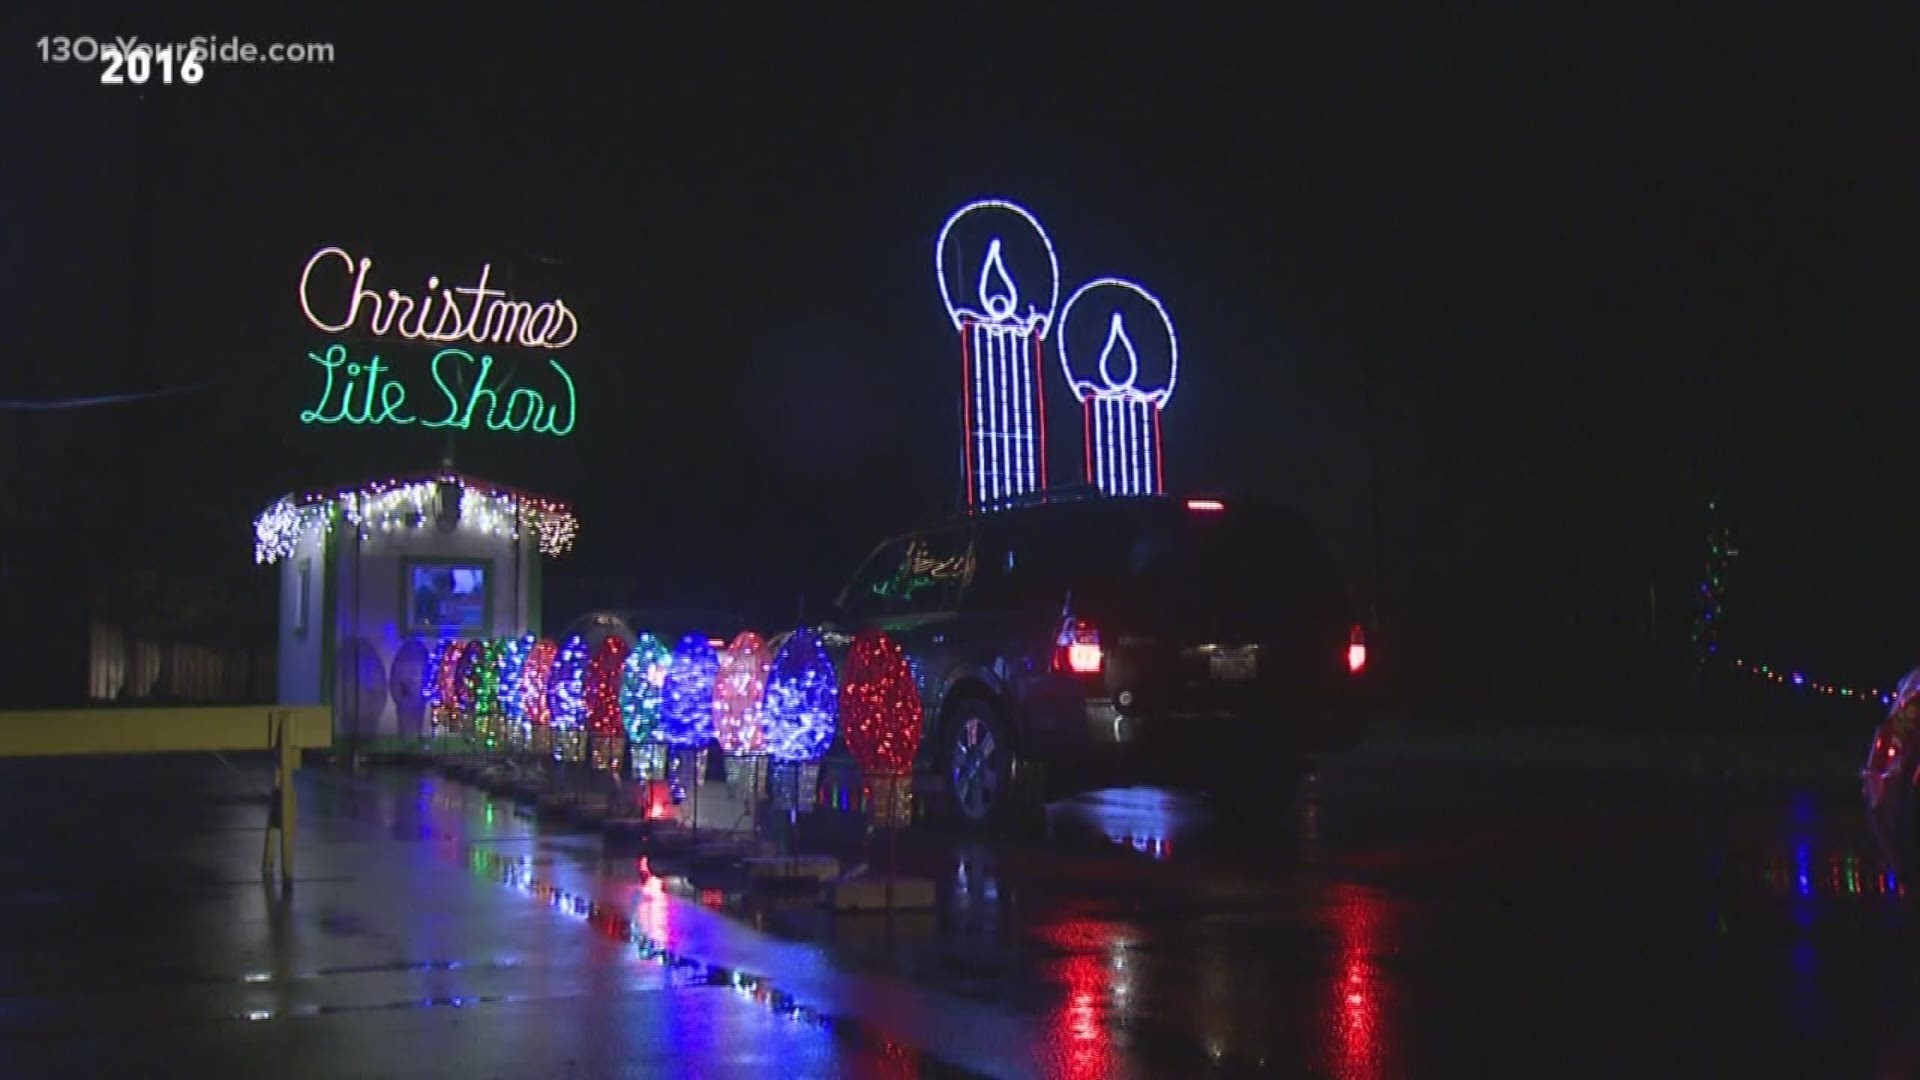 13 ON YOUR SIDE's Shanna Groves gets a chance to check out Fifth Third Ballpark's twinkling light spectacular.